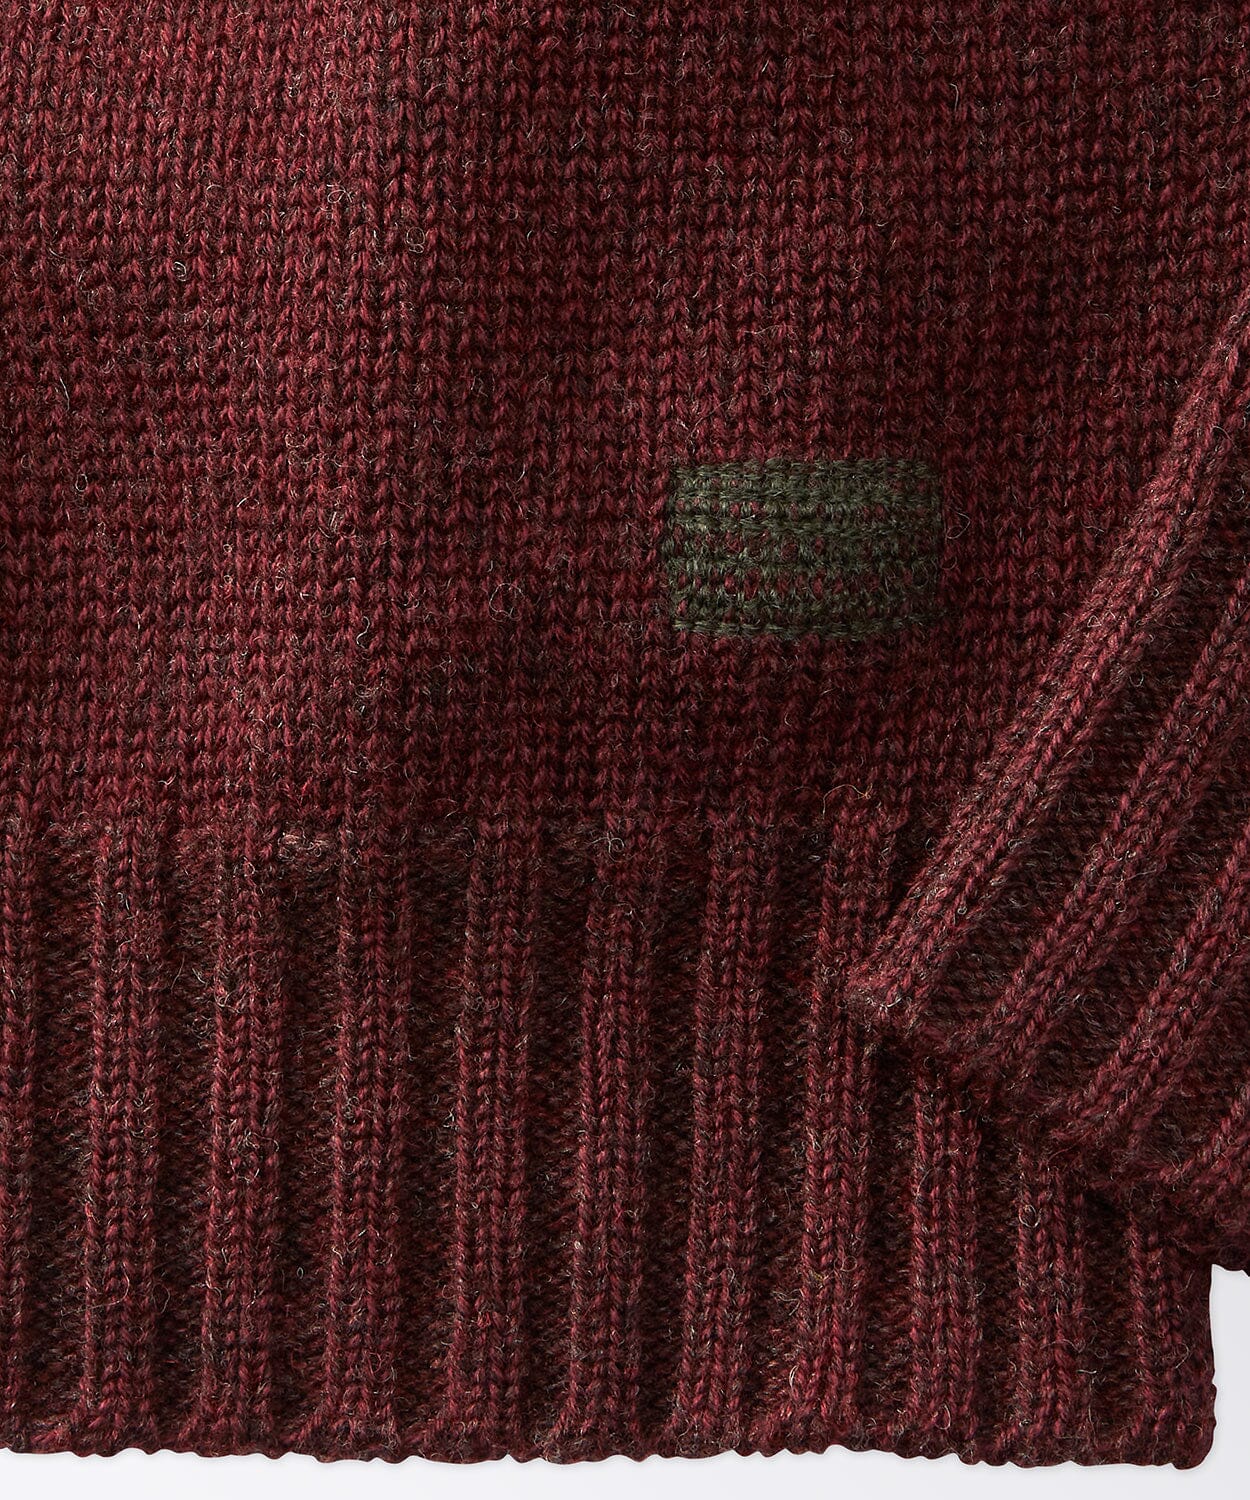 sleeve of a mens crew neck sweater